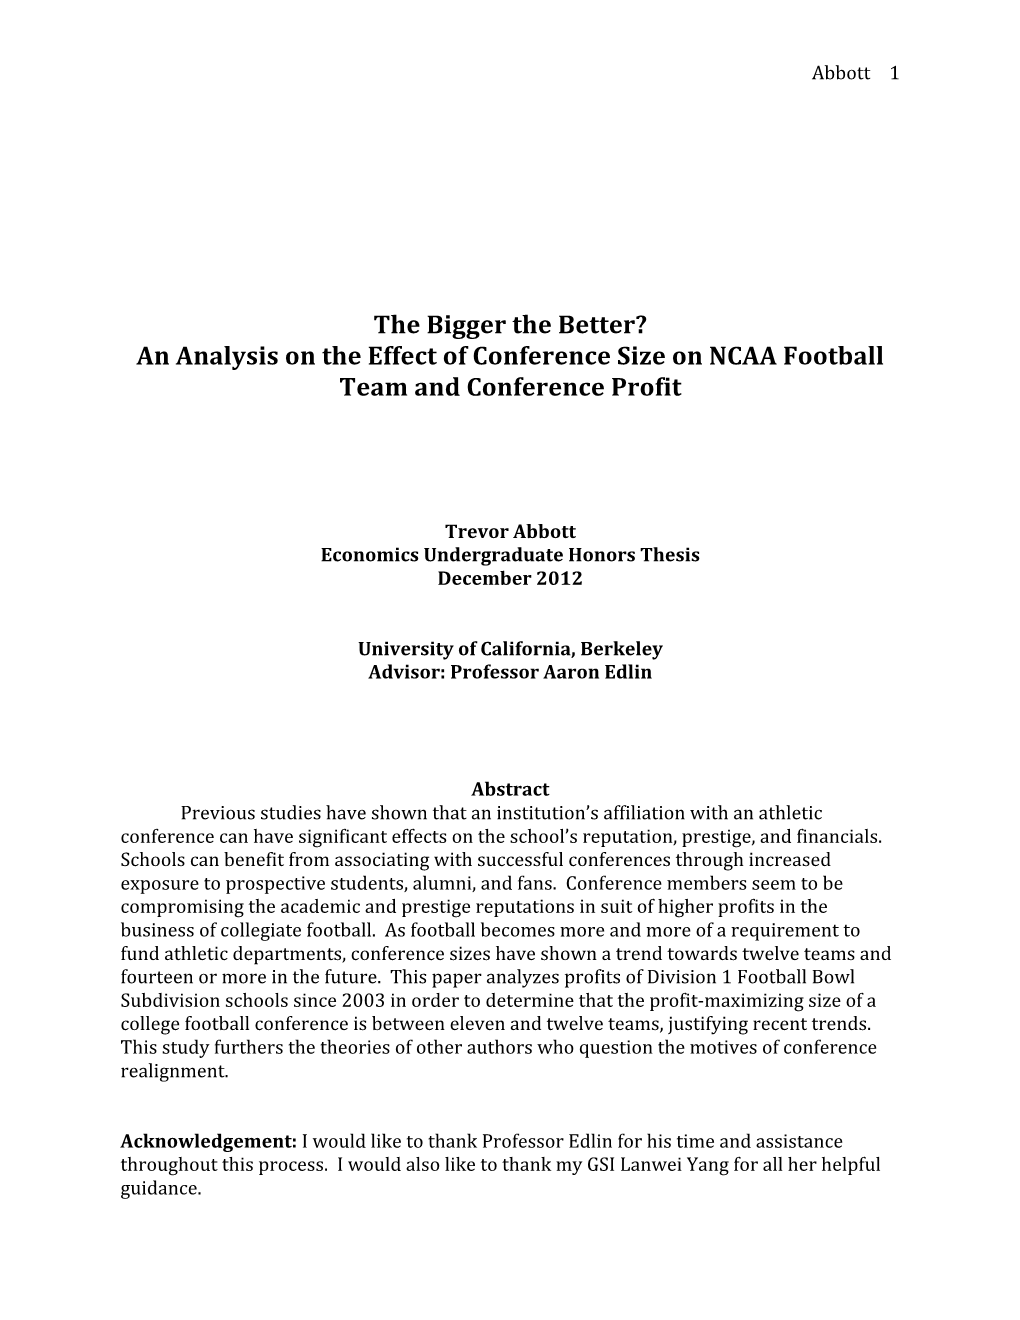 The Bigger the Better? an Analysis on the Effect of Conference Size on NCAA Football Team and Conference Profit